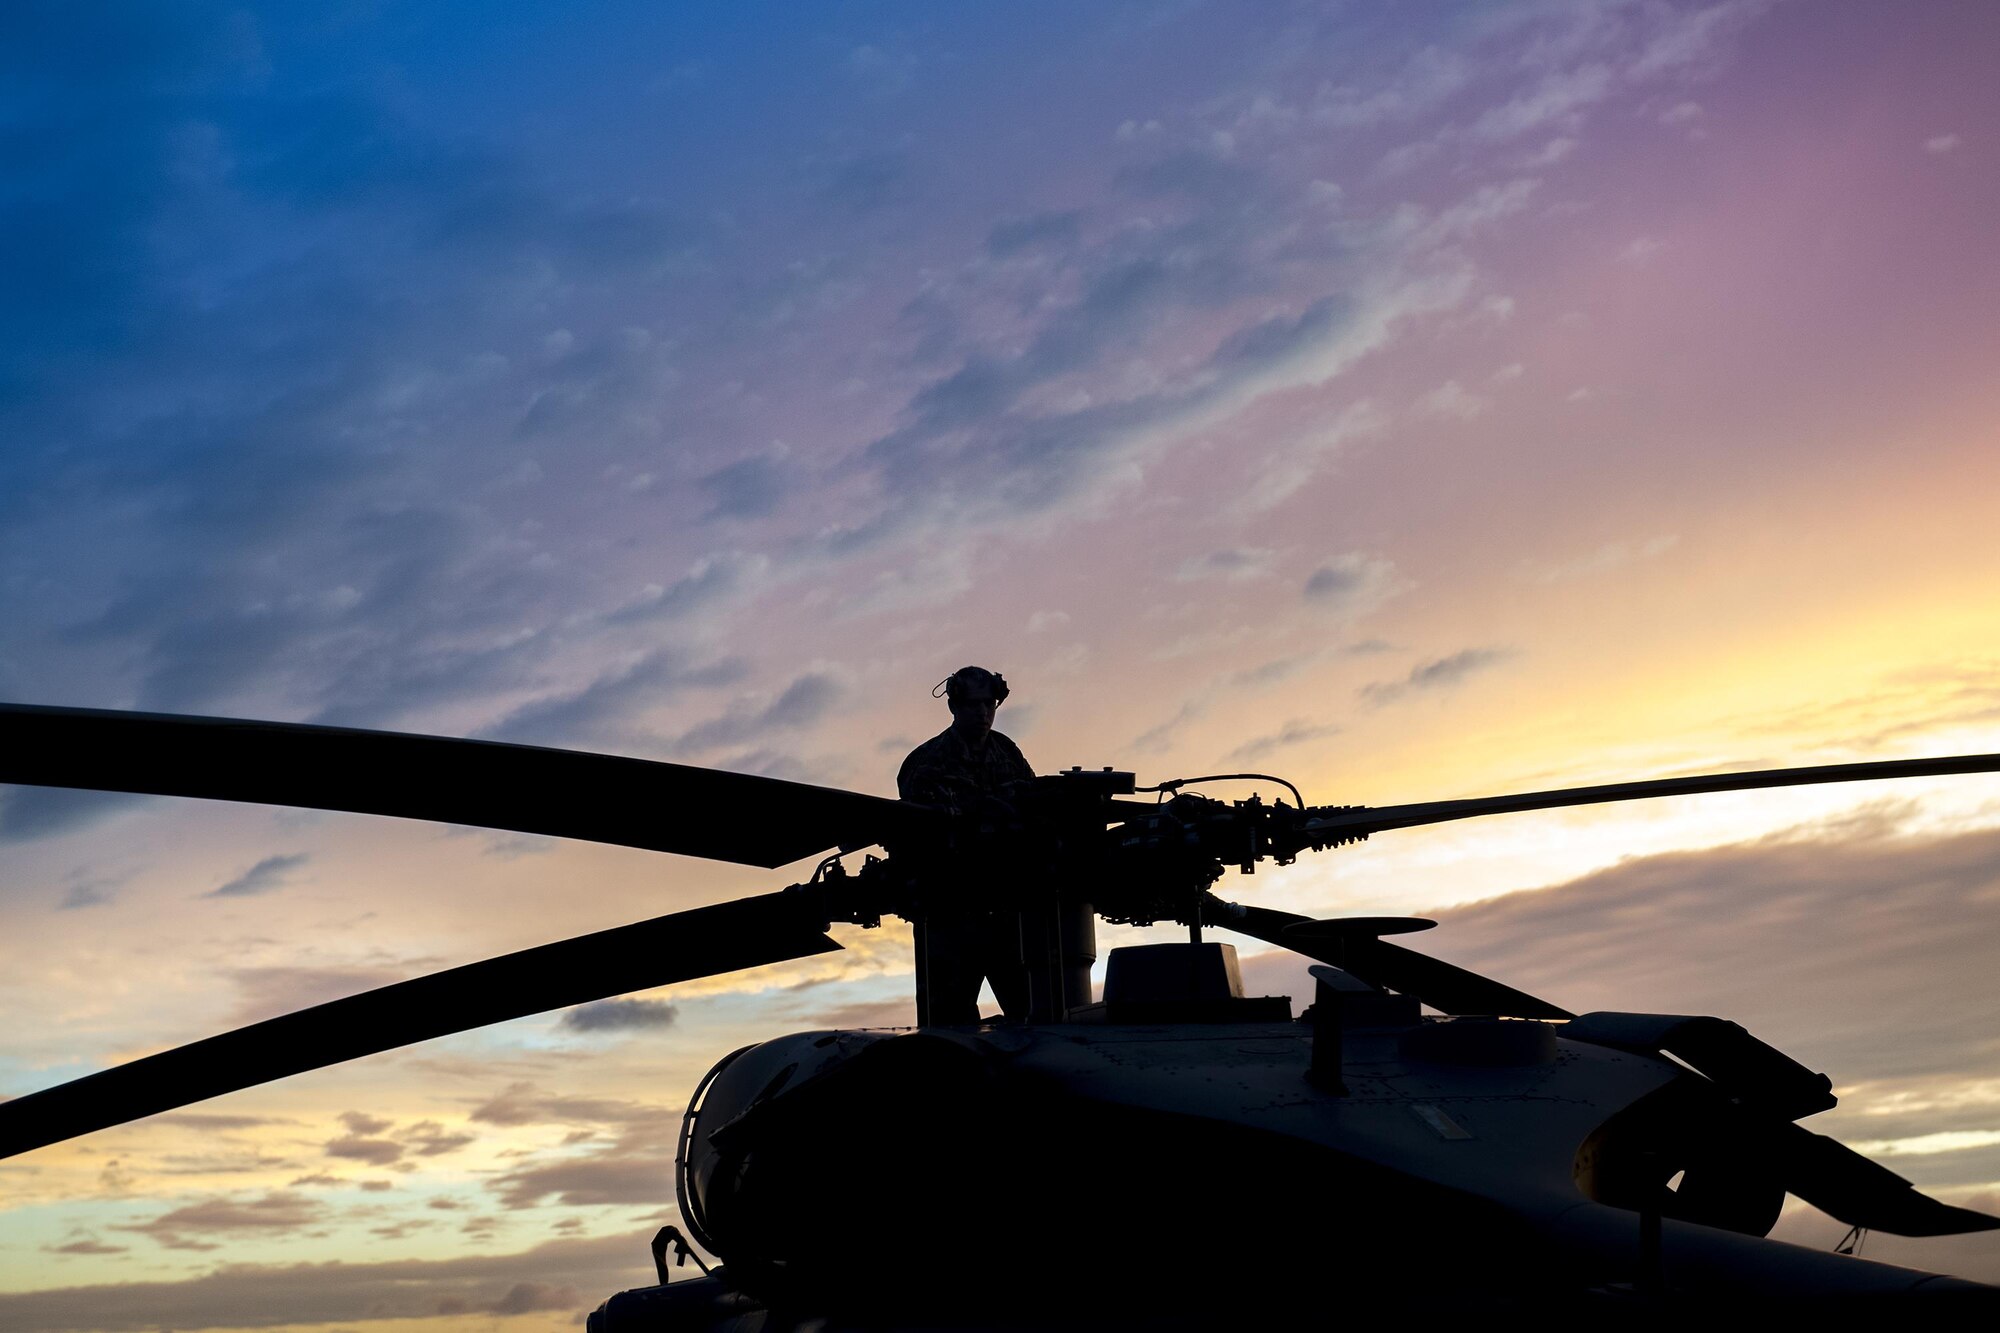 Staff Sgt. Sean O’Neill, 41st Helicopter Maintenance Unit maintainer, checks the rotor blades of an HH-60J Pave Hawk, Aug. 28, 2017, at Easterwood Airport in College Station, Texas. The 347th Rescue Group from Moody Air Force Base, Ga. sent aircraft and personnel in support of Air Forces Northern as part of Northern Command's support of FEMA's disaster response efforts. (U.S. Air Force photo by Tech. Sgt. Zachary Wolf)